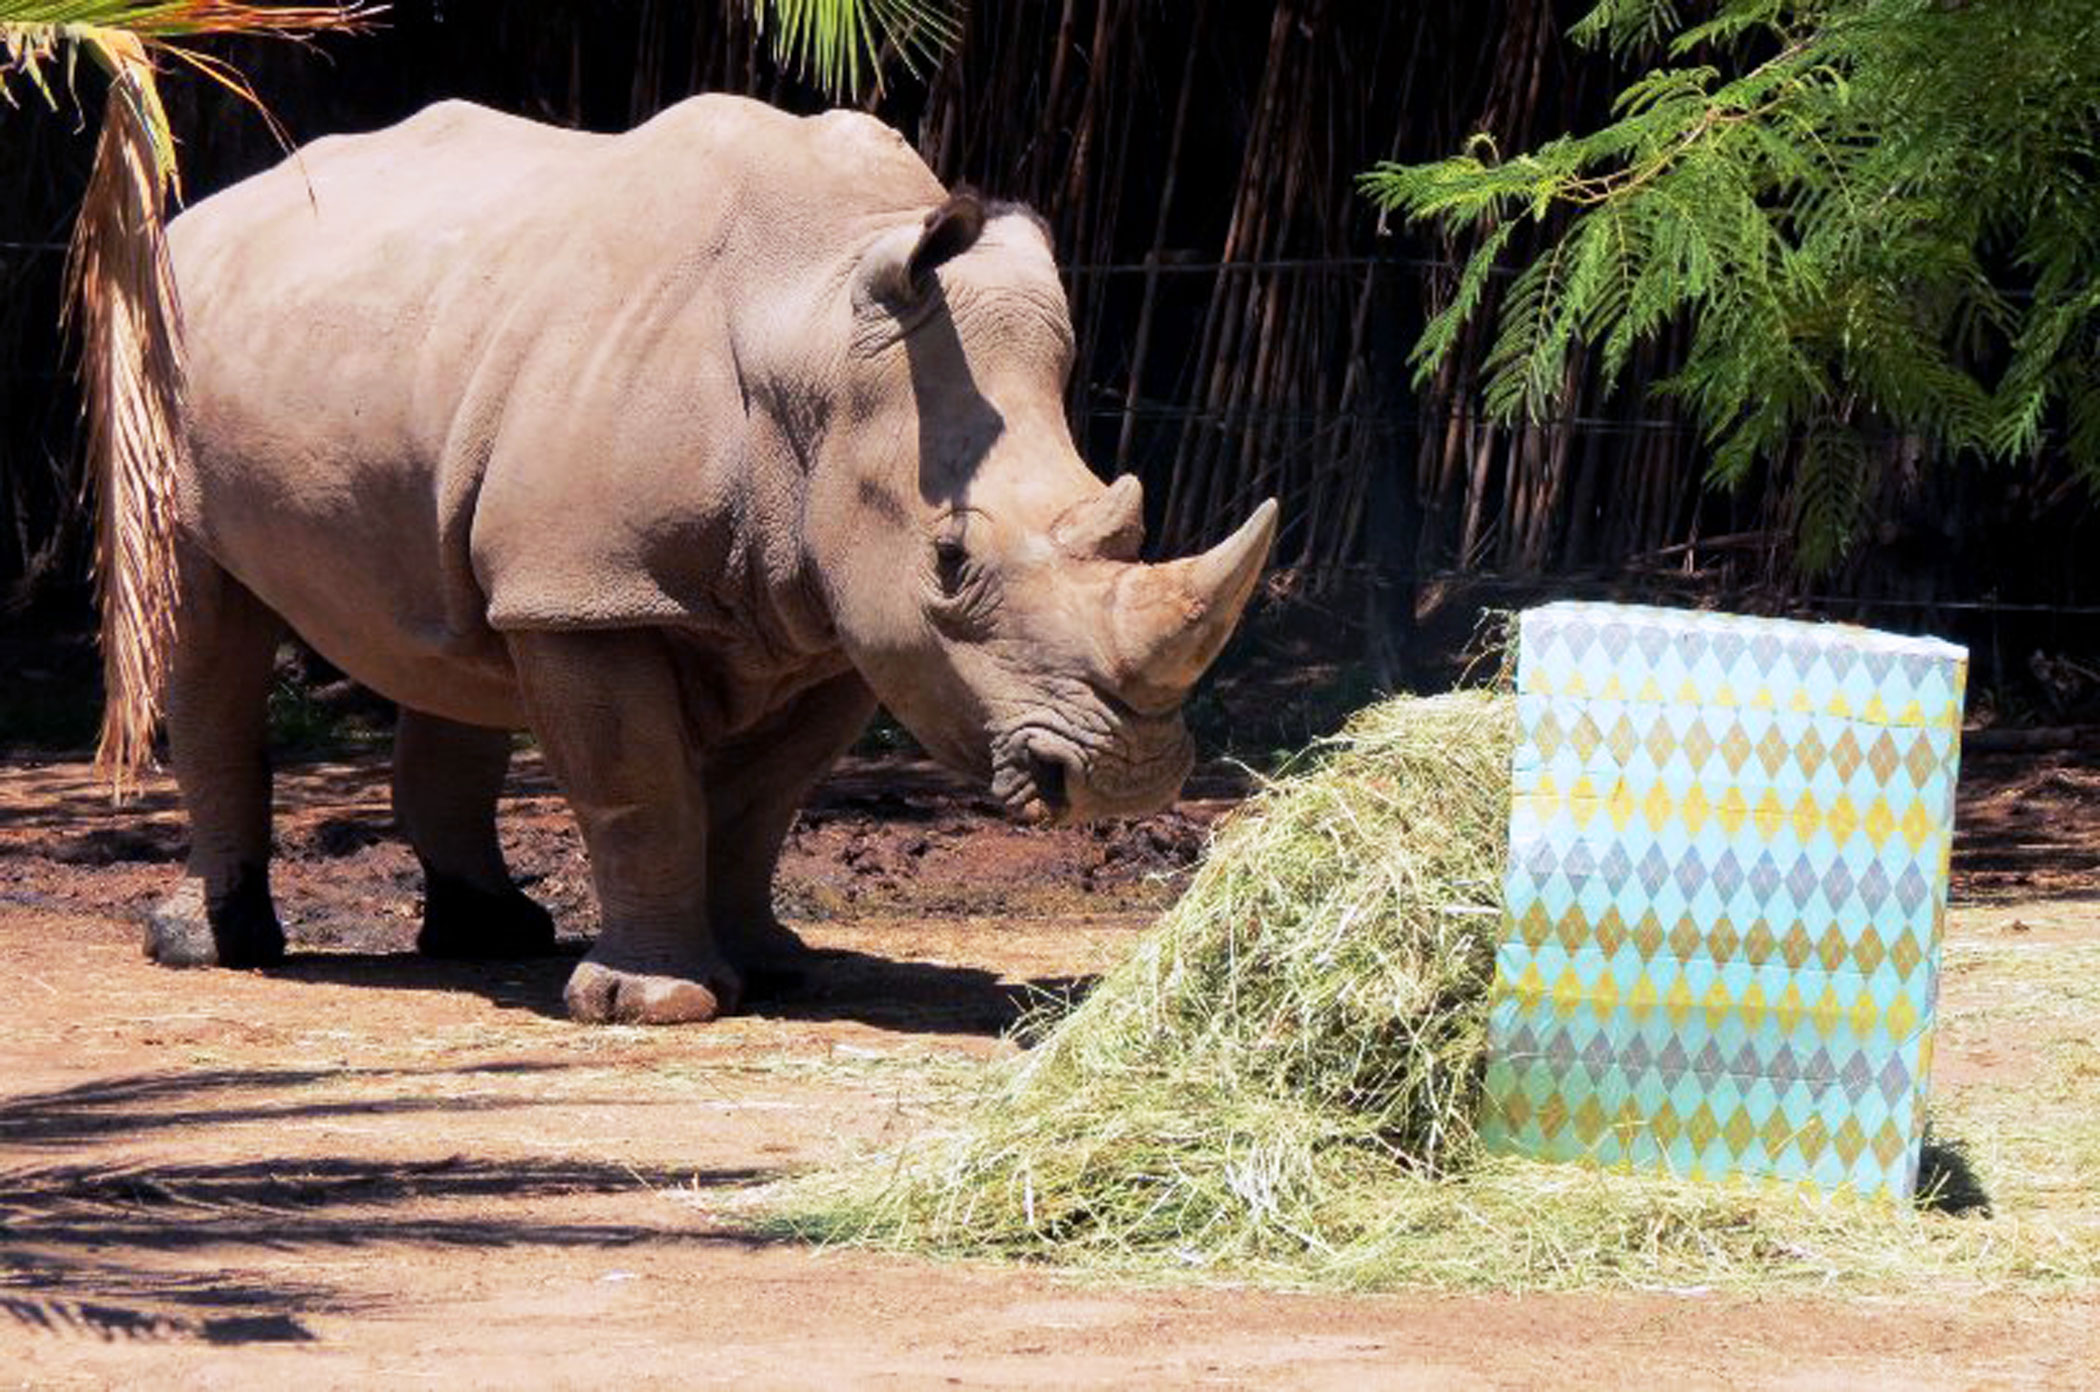 This image released by Buin Park Zoo shows a rhinoceros approaching its Christmas gift at the Buin Park Zoo on Dec. 22, 2105, in the commune of Buin, Chile.